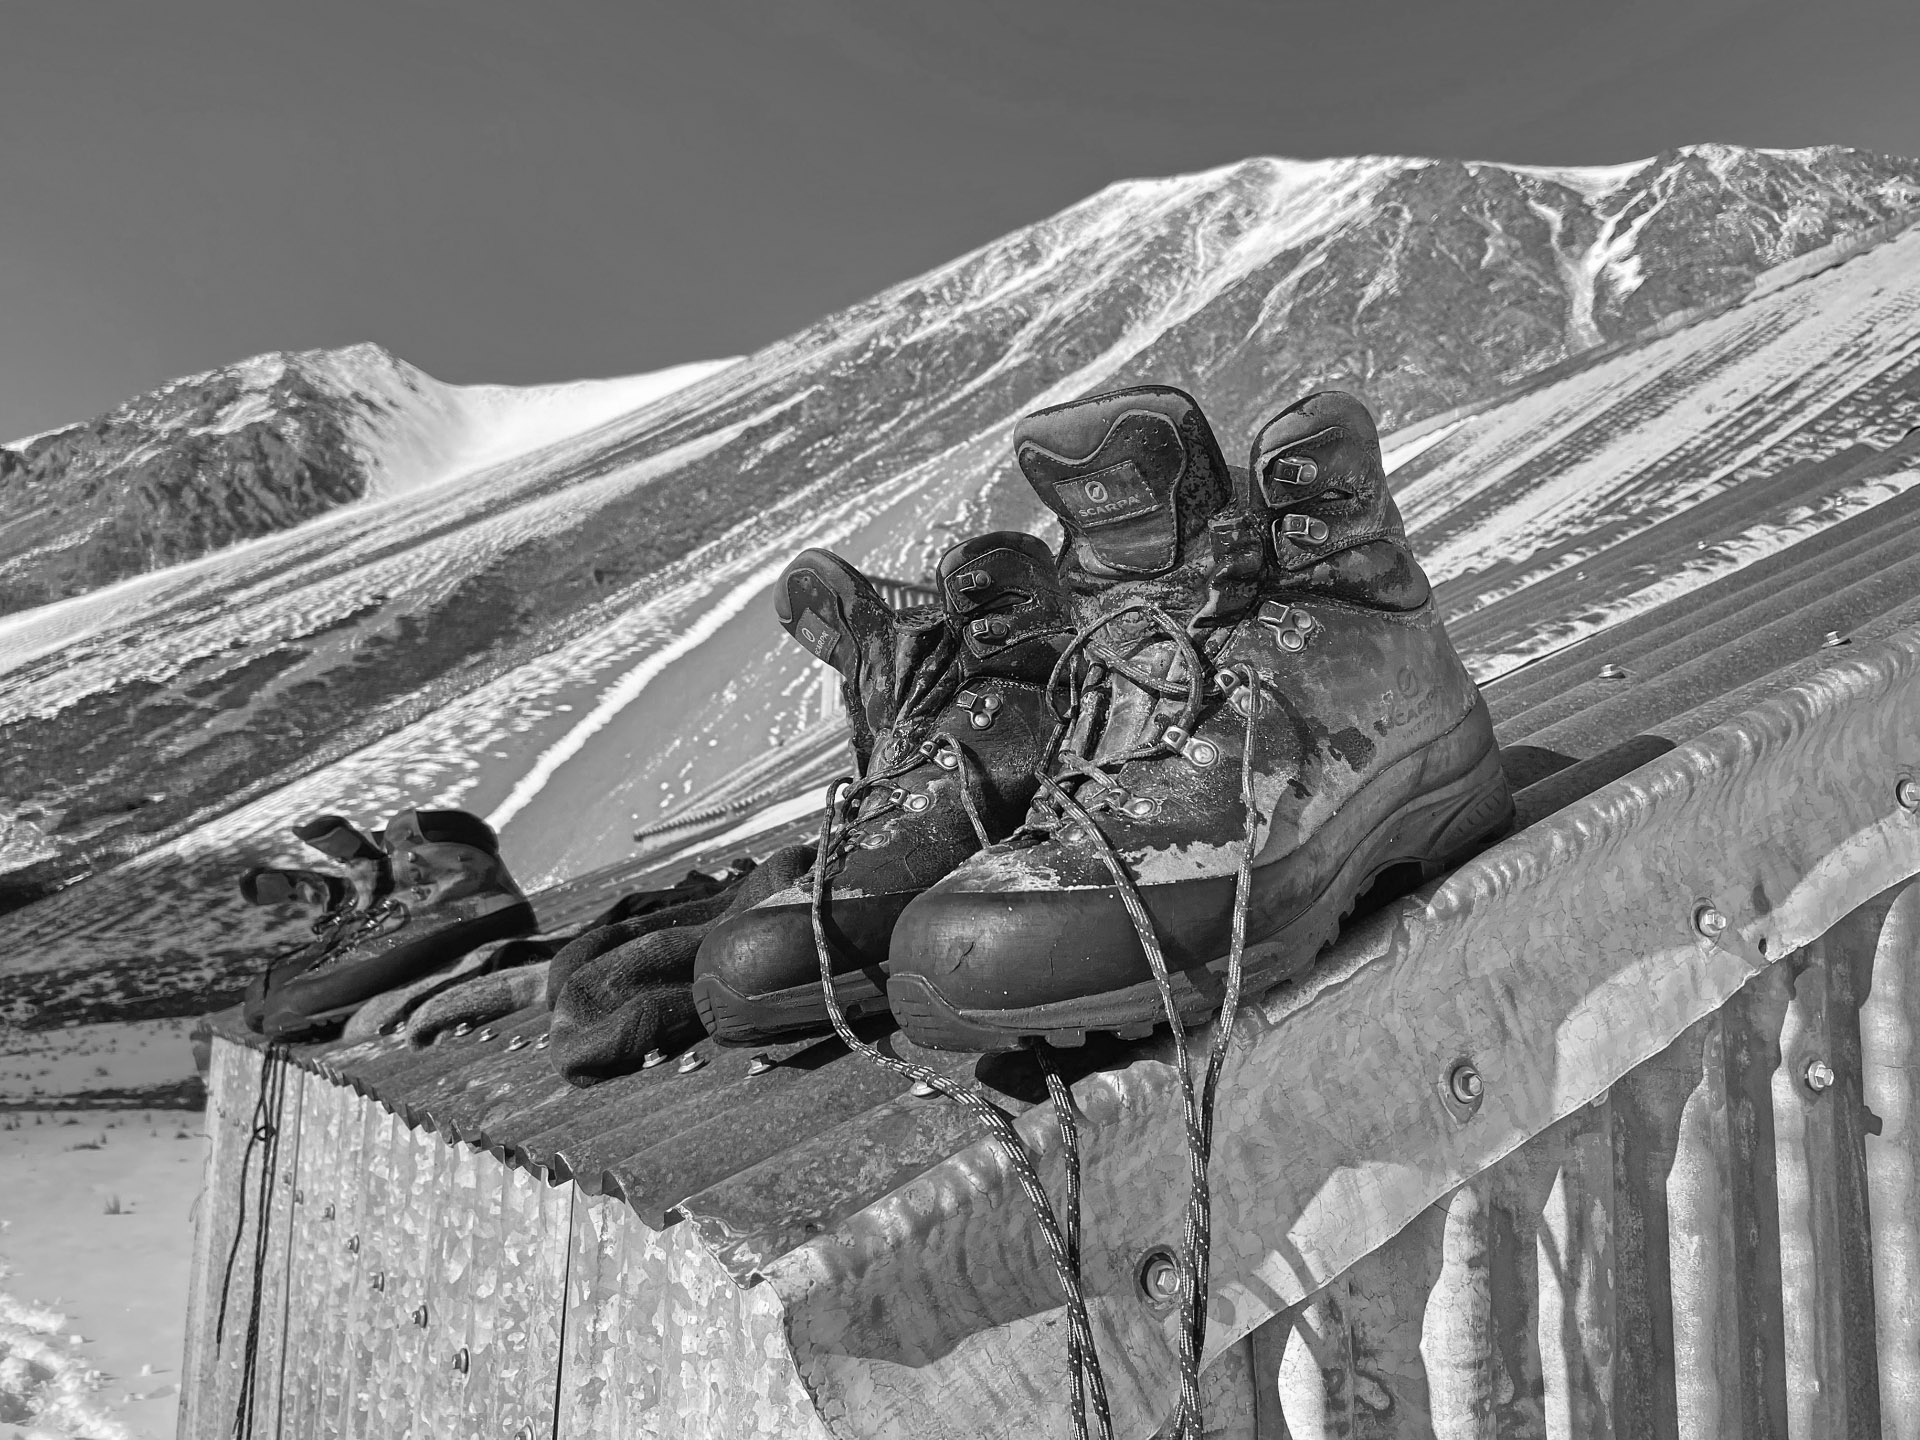 Thawing boots and sox at Top Hut